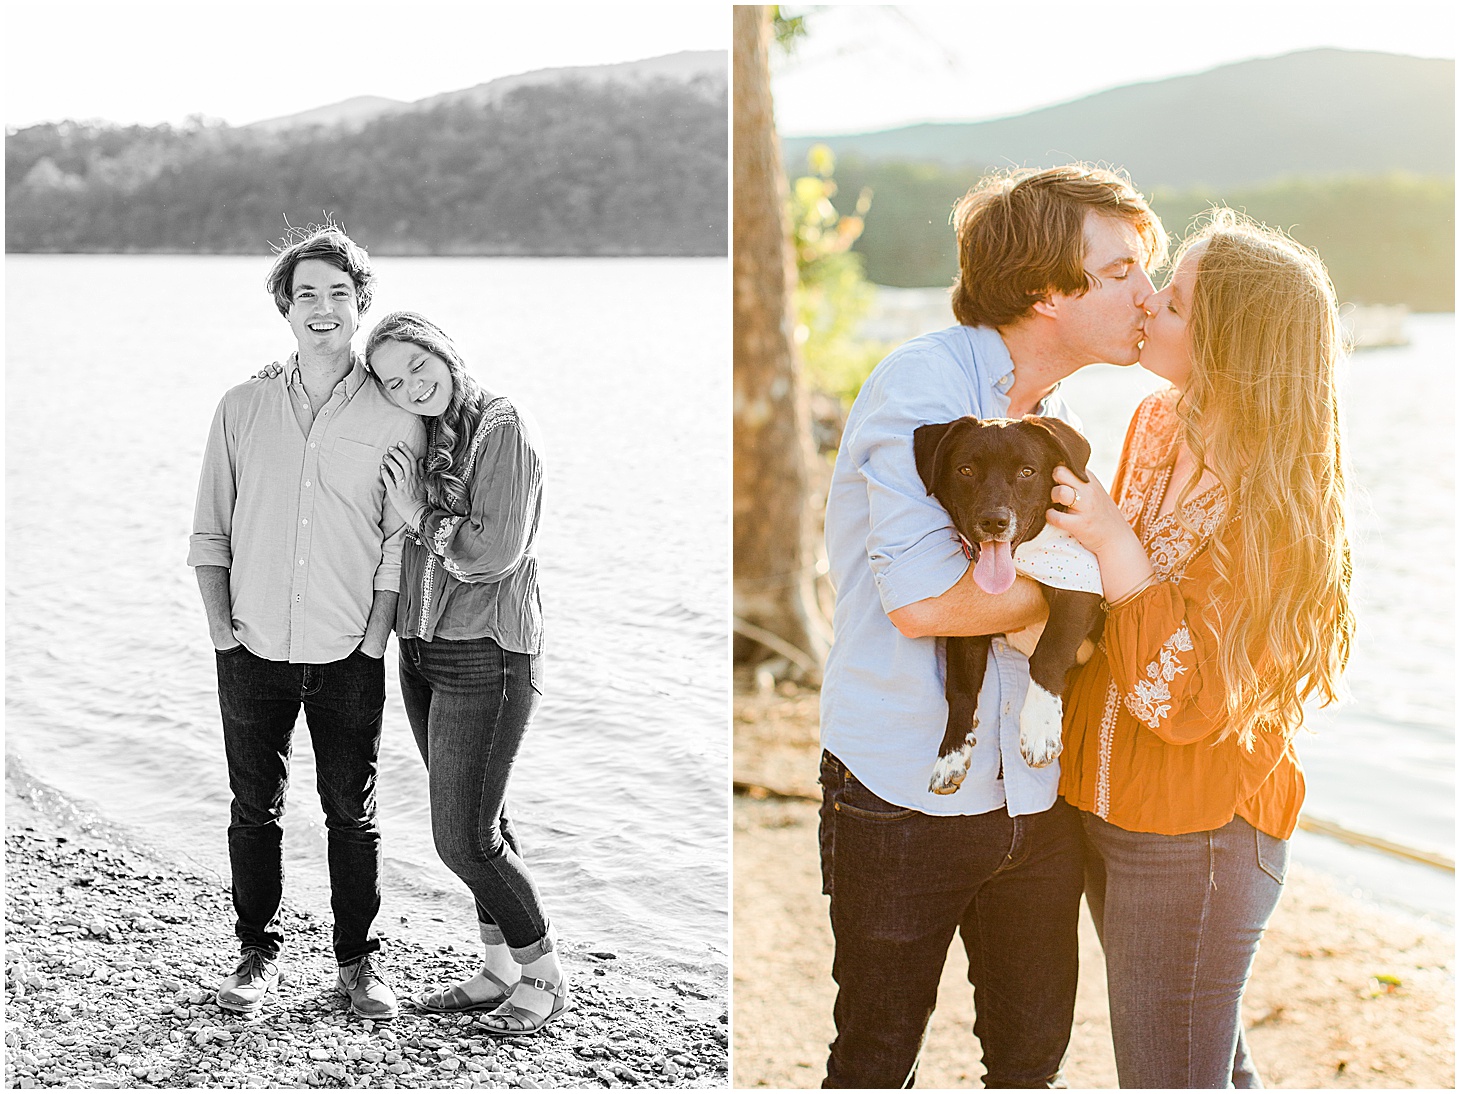 carvinscoveengagementsession_roanokeengagementsession_carvinscove_virginiawedding_virginiaweddingphotographer_vaweddingphotographer_photo_0021.jpg